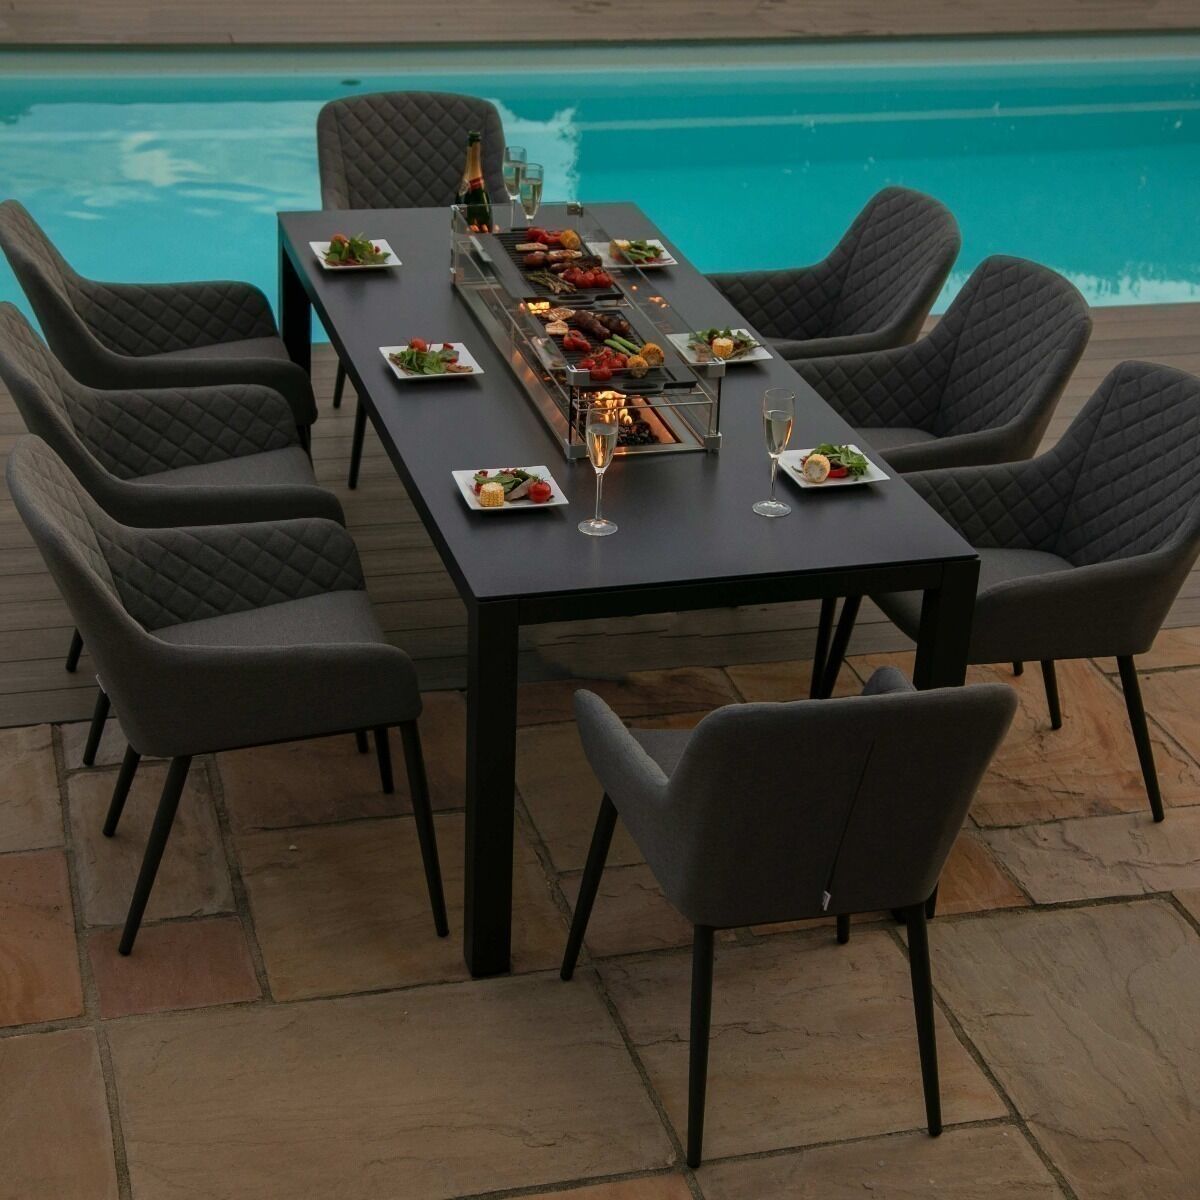 Maze - Outdoor Fabric Zest 8 Seat Rectangular Dining Set with Fire Pit Table - Flanelle product image